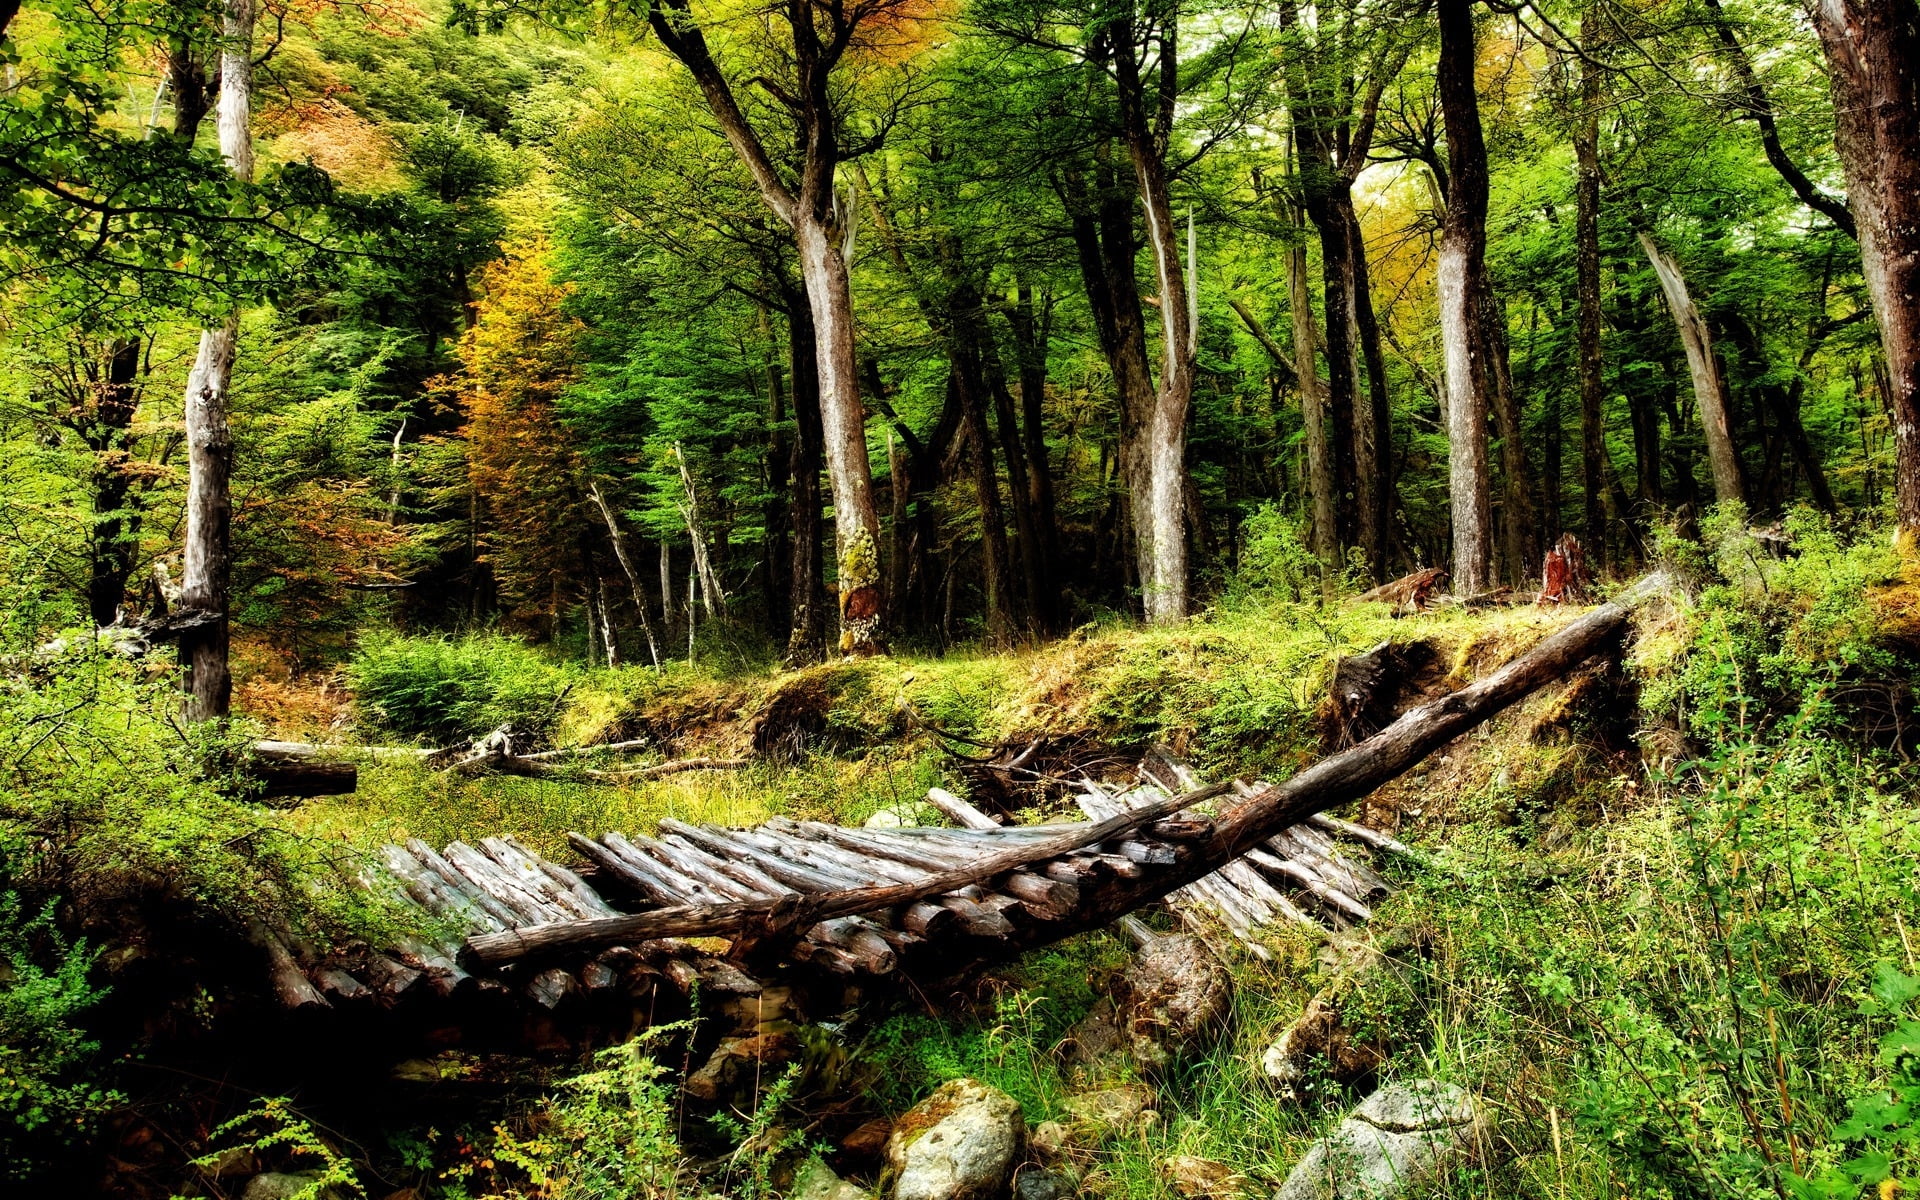 Broken Wooden Bridge In The Middle Of The Woods At Daytime Photography